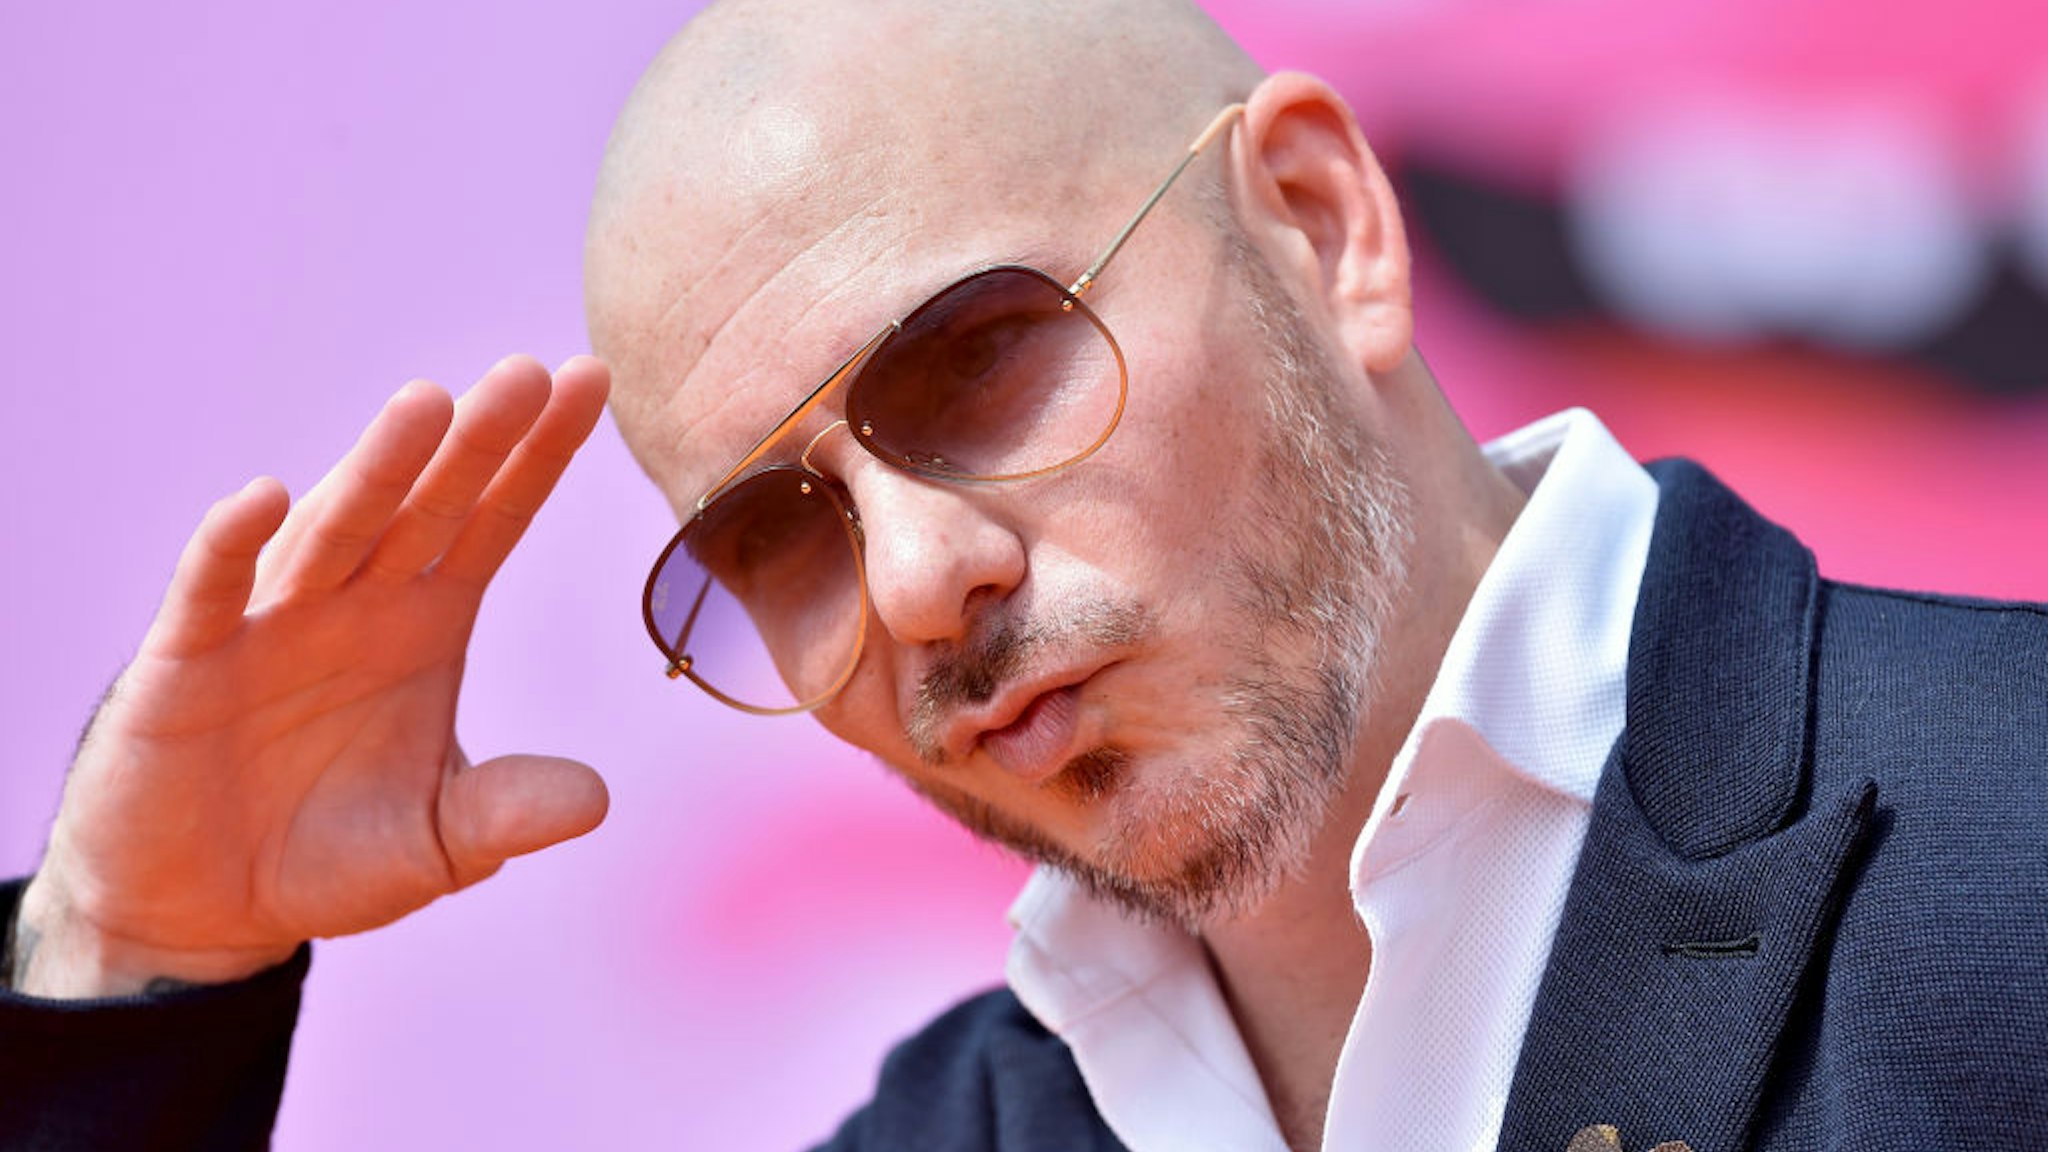 Pitbull attends STX Films World Premiere of "UglyDolls" at Regal Cinemas L.A. Live on April 27, 2019 in Los Angeles, California.